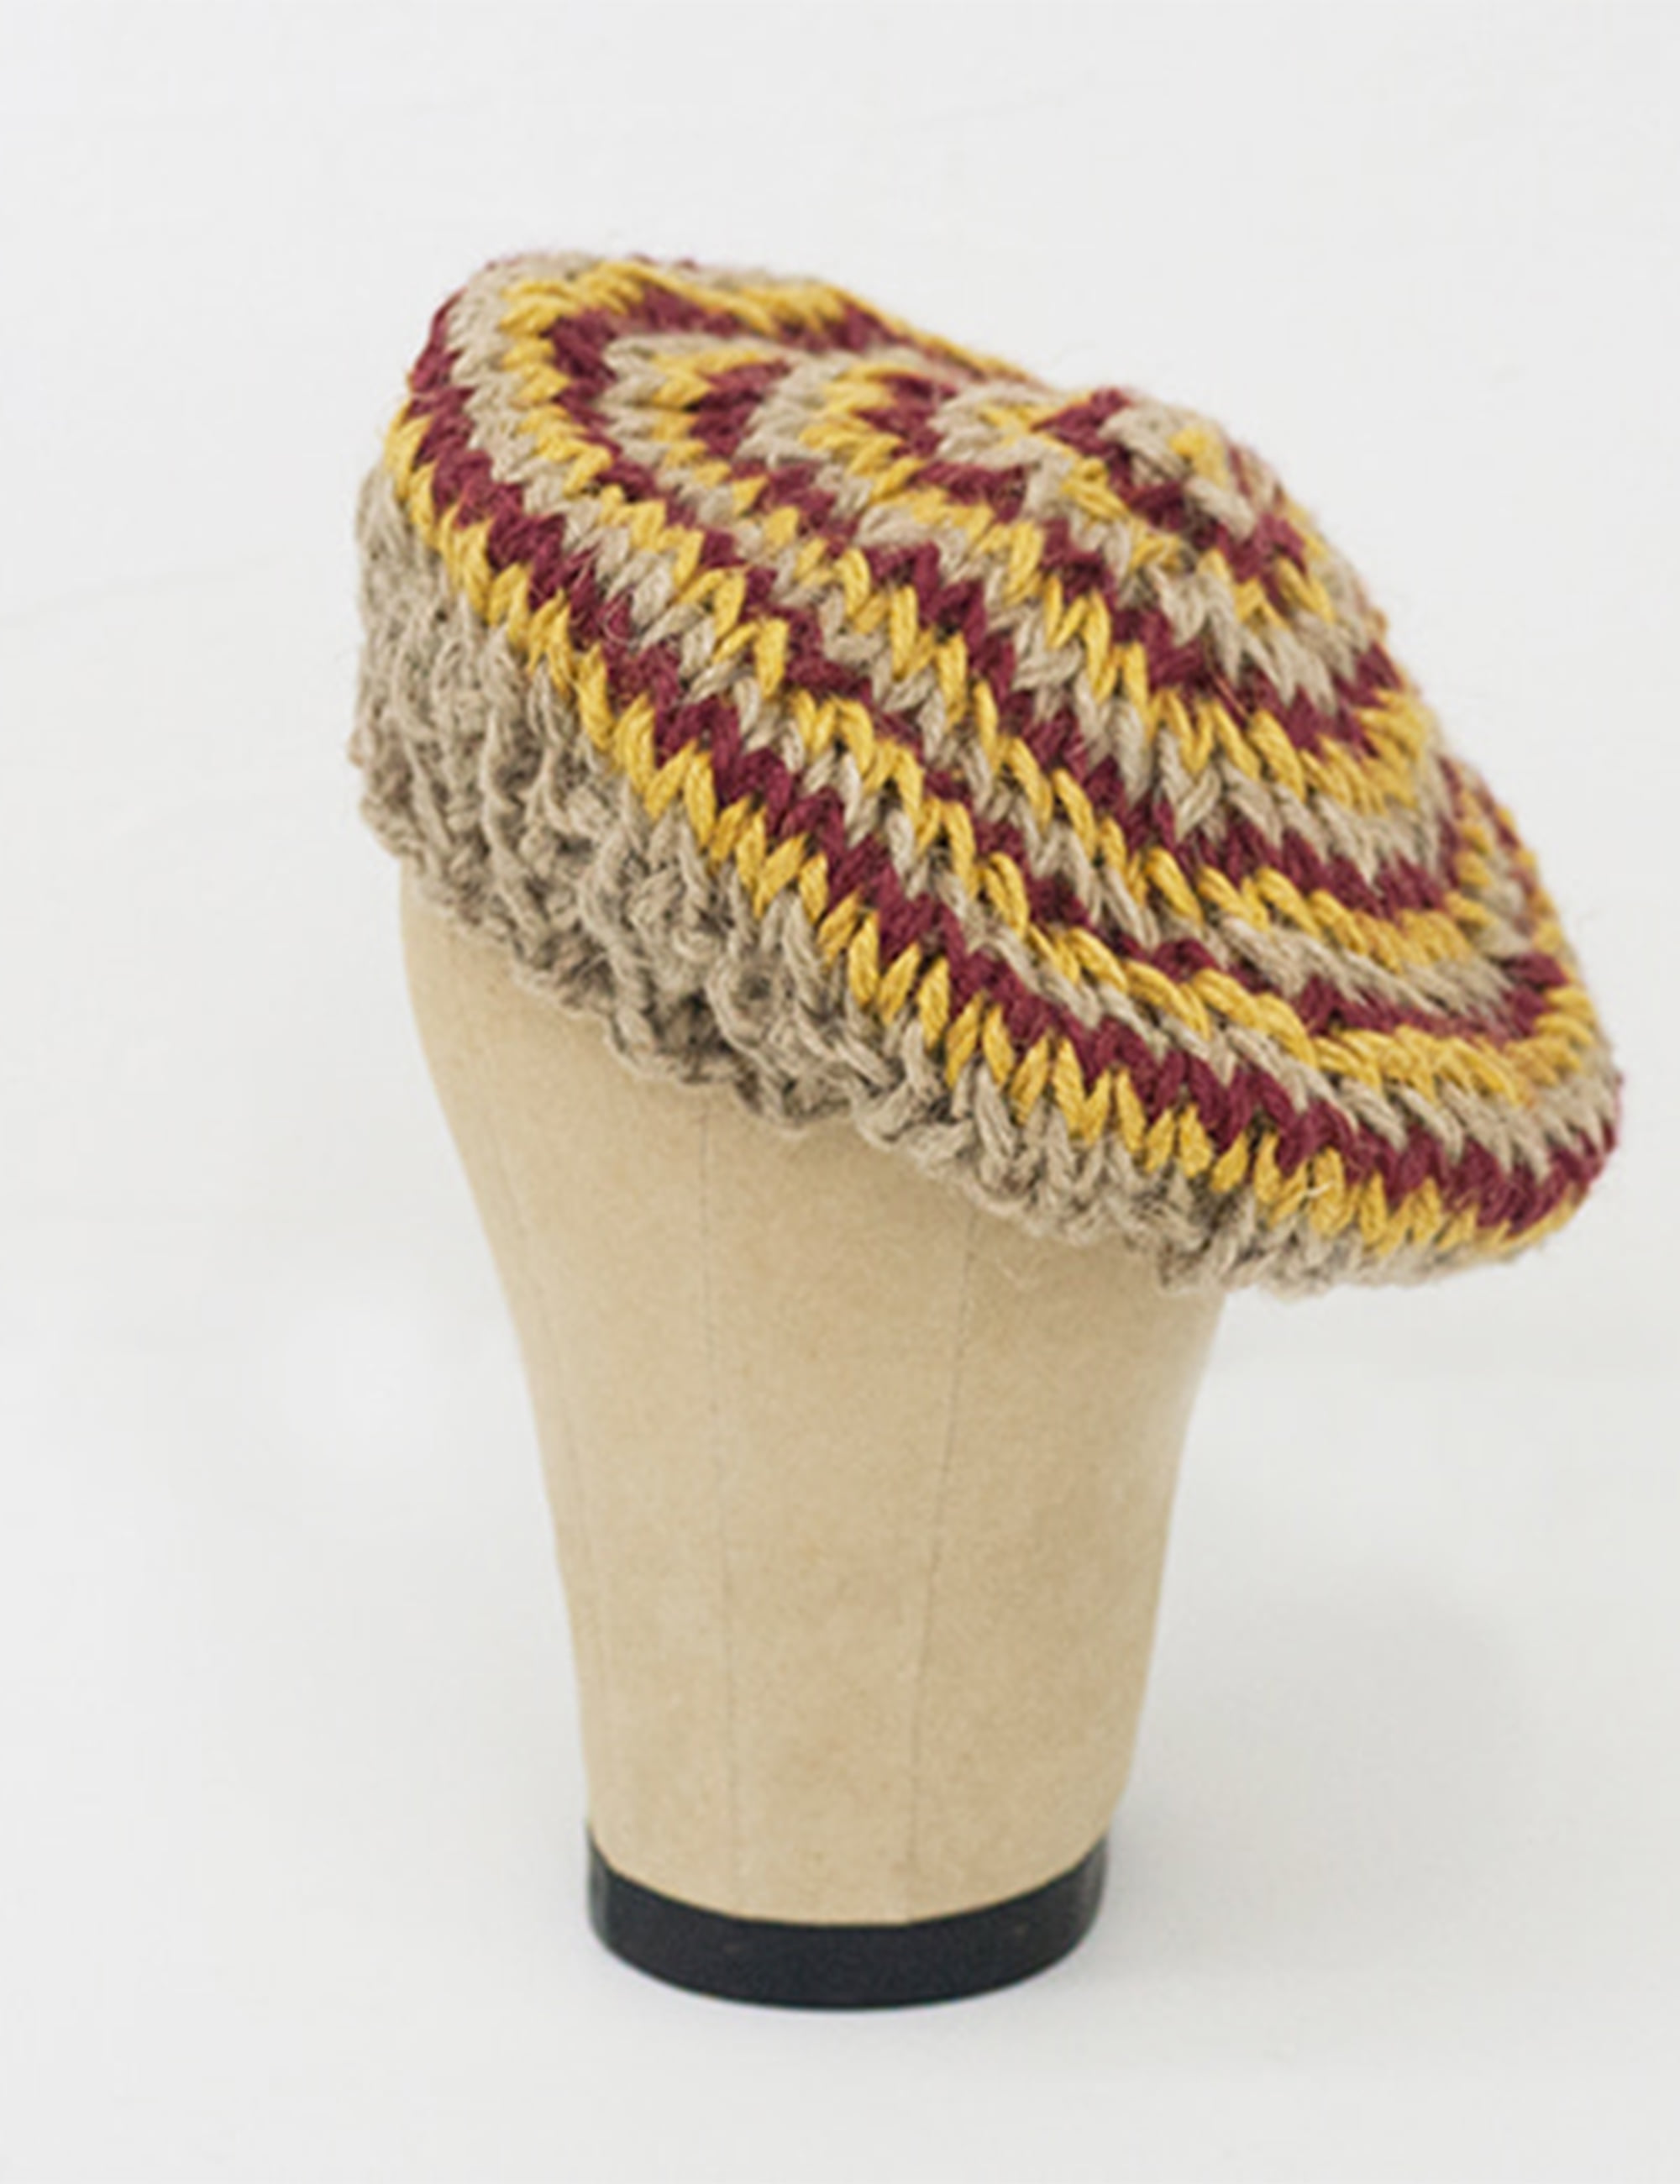 HAND KNITTED JUTE BERET_NATURAL/YELLOW/RED